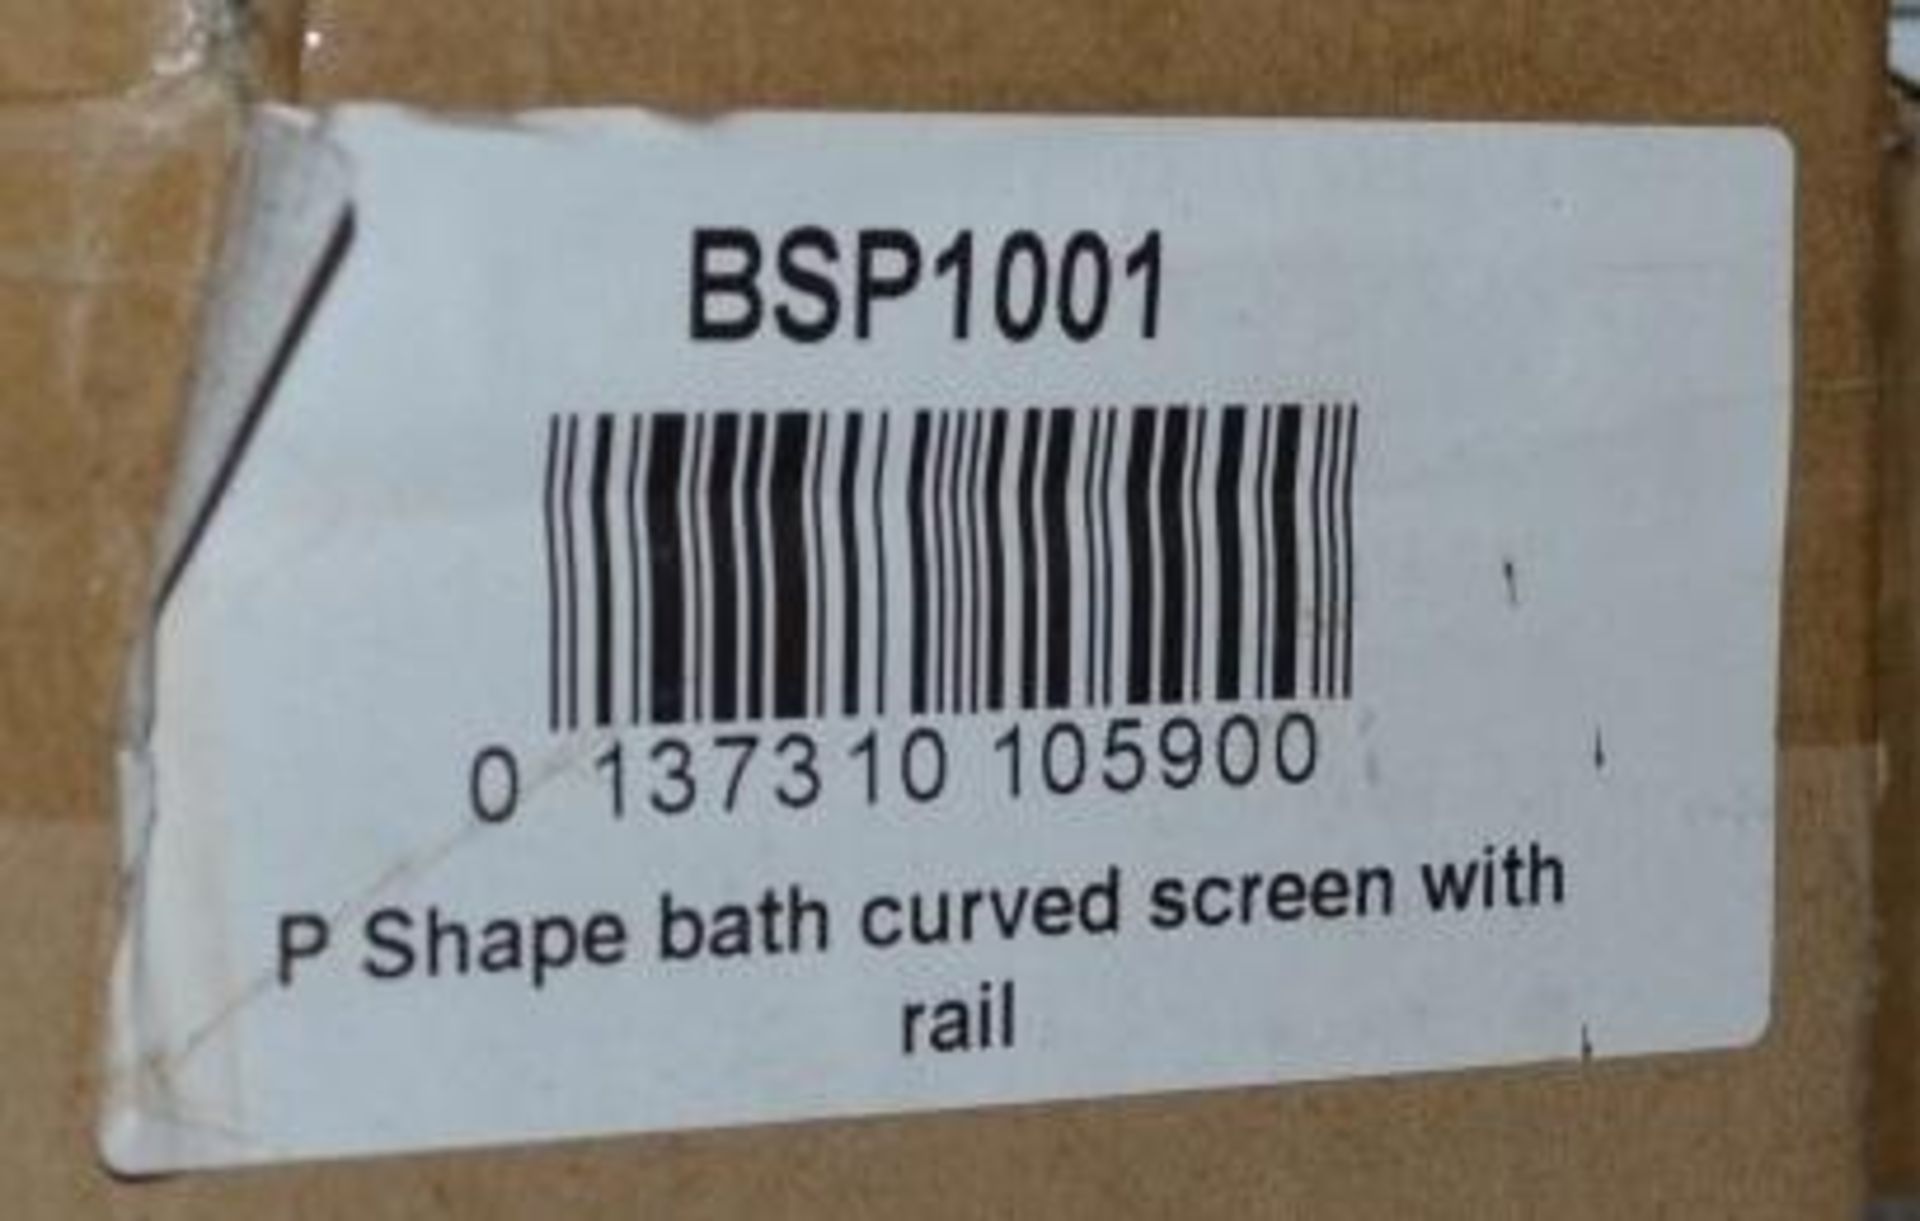 1 x Curved Bath Screen With Rail - BSP1001 - New / Unused Stock - Dimensions: 745 x 1480 x 6mm - CL2 - Image 2 of 2